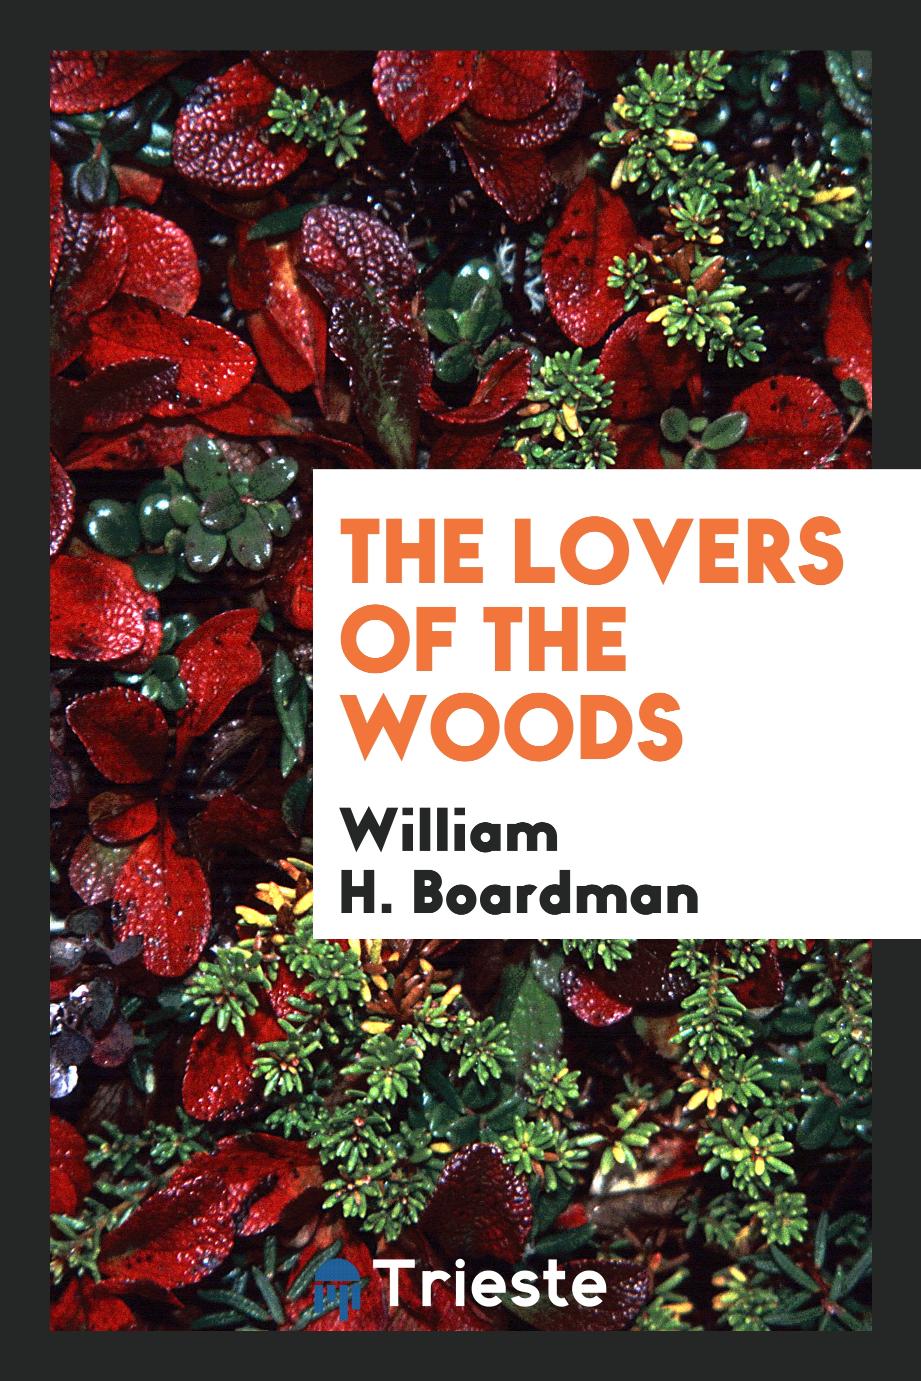 The lovers of the woods